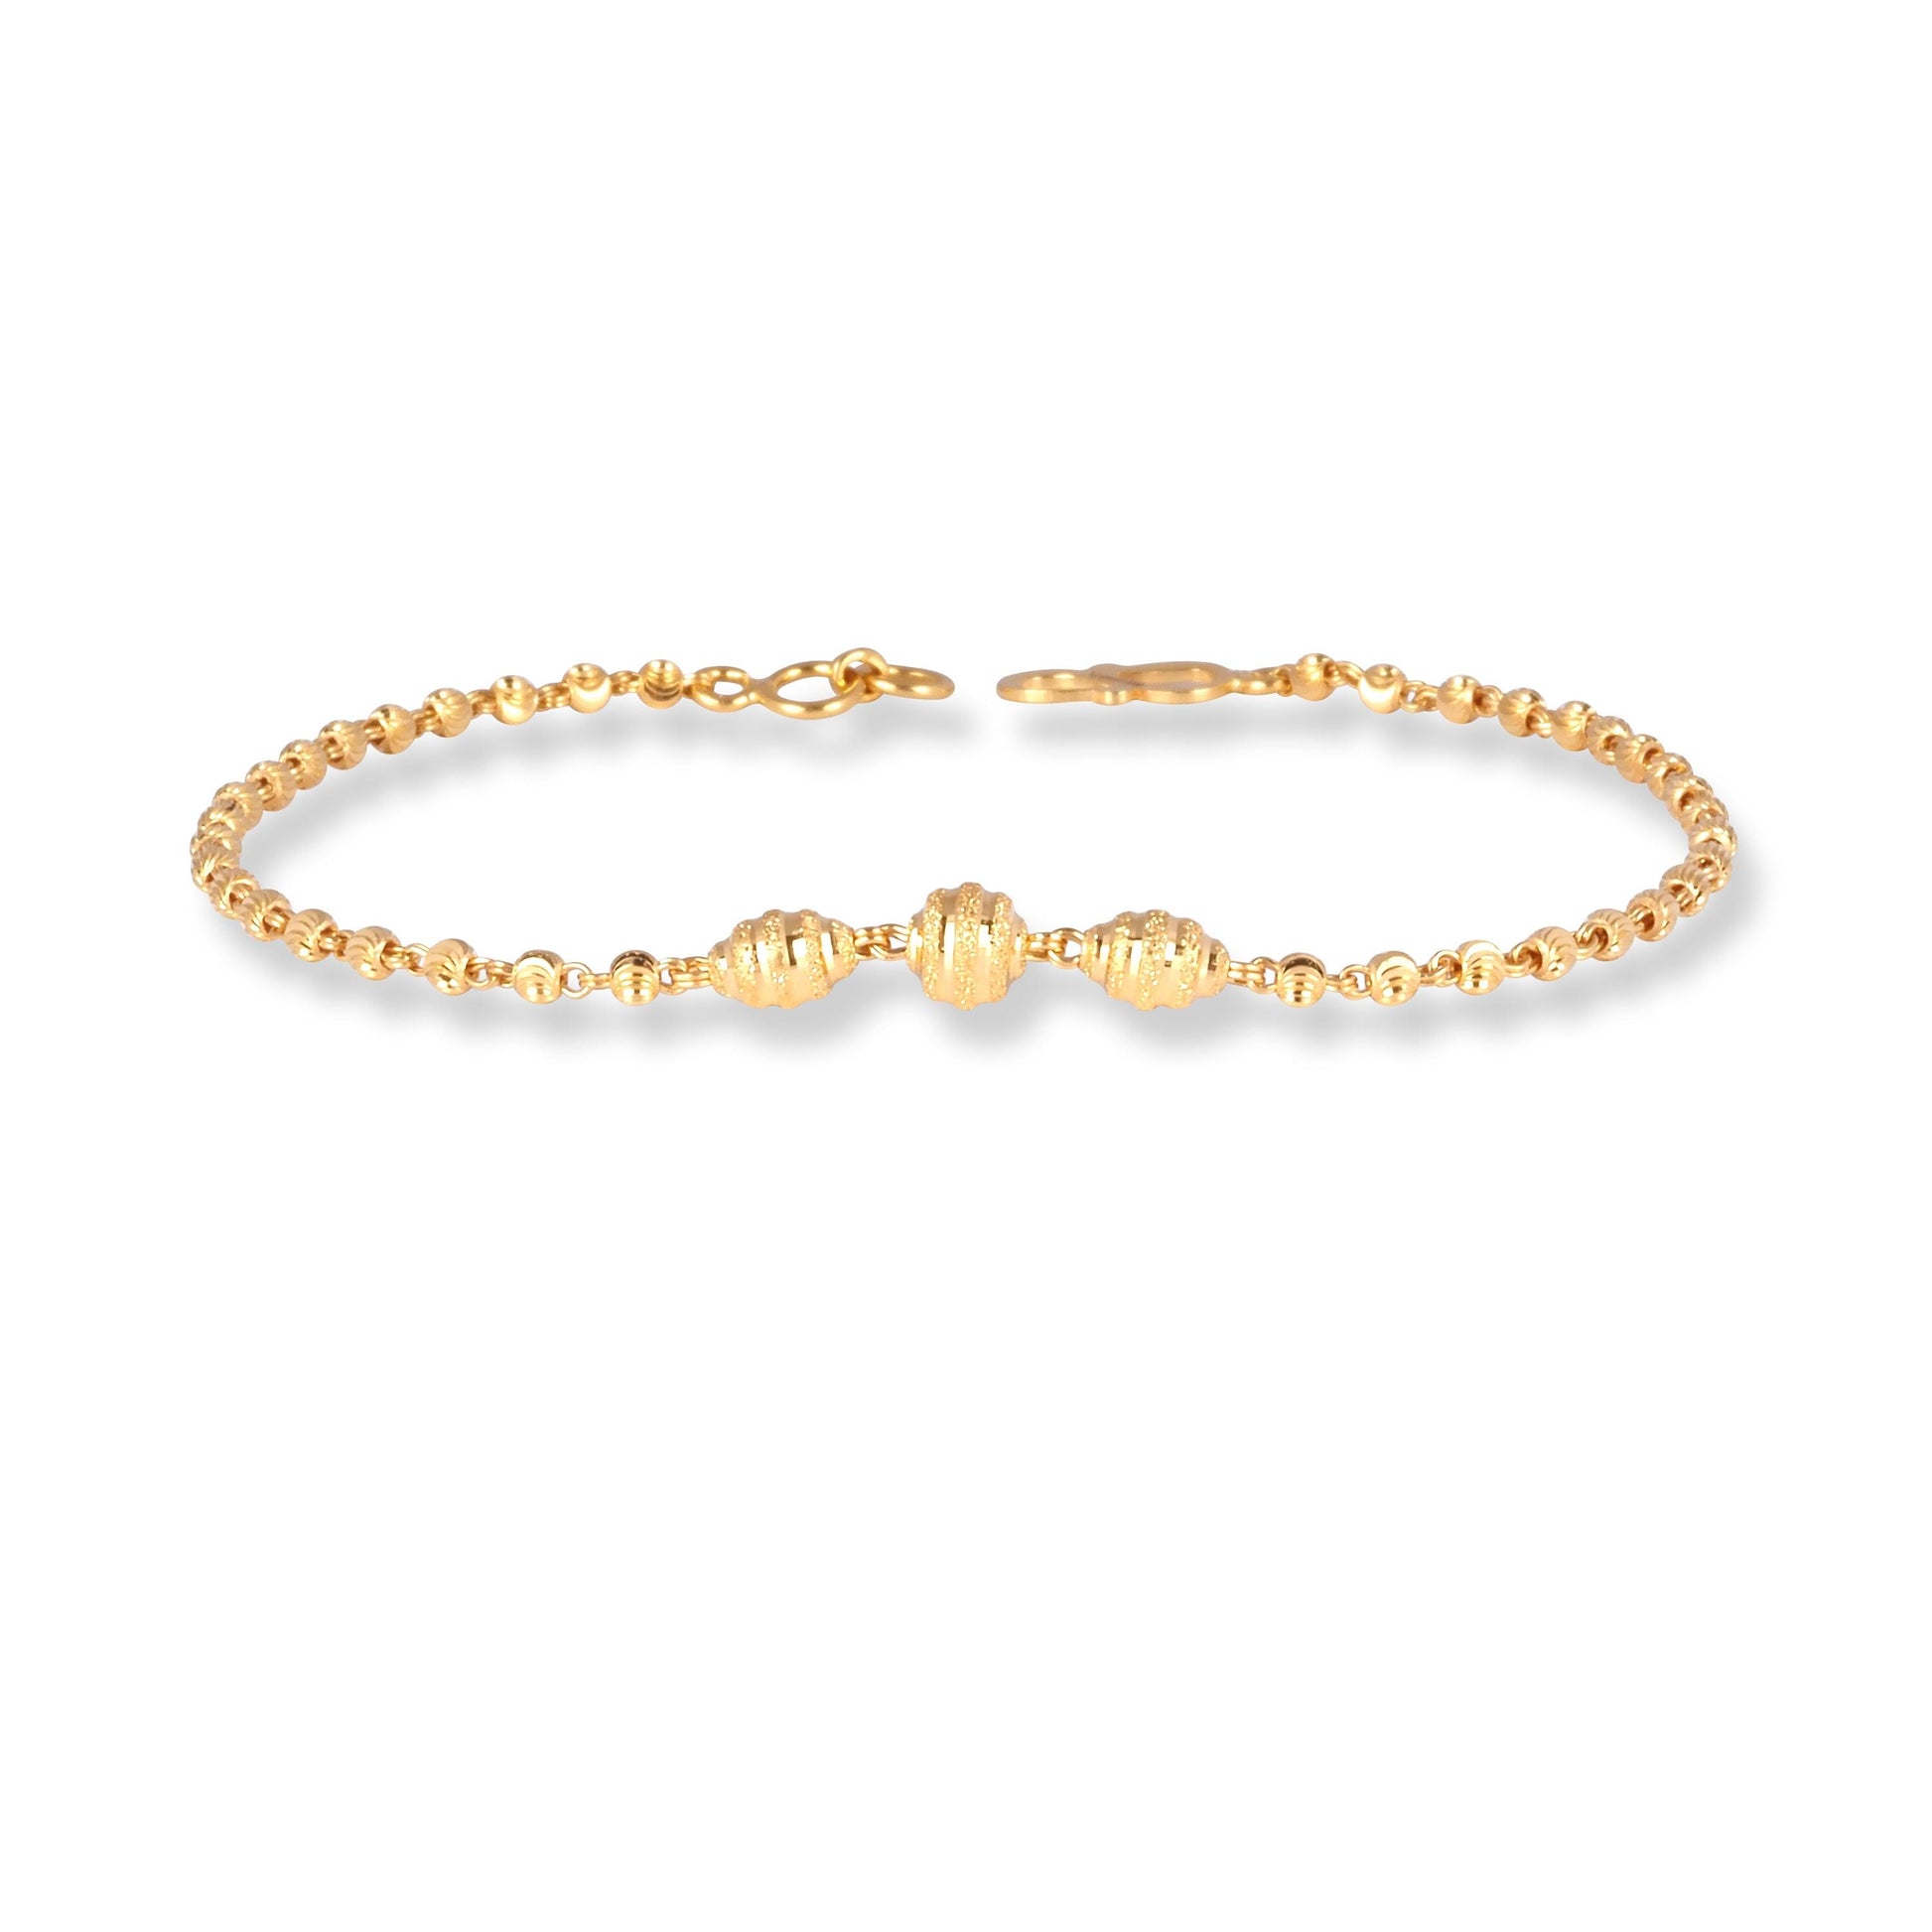 22ct Gold Ladies Beaded Bracelet with ''S'' Clasp LBR-7150 - Minar Jewellers